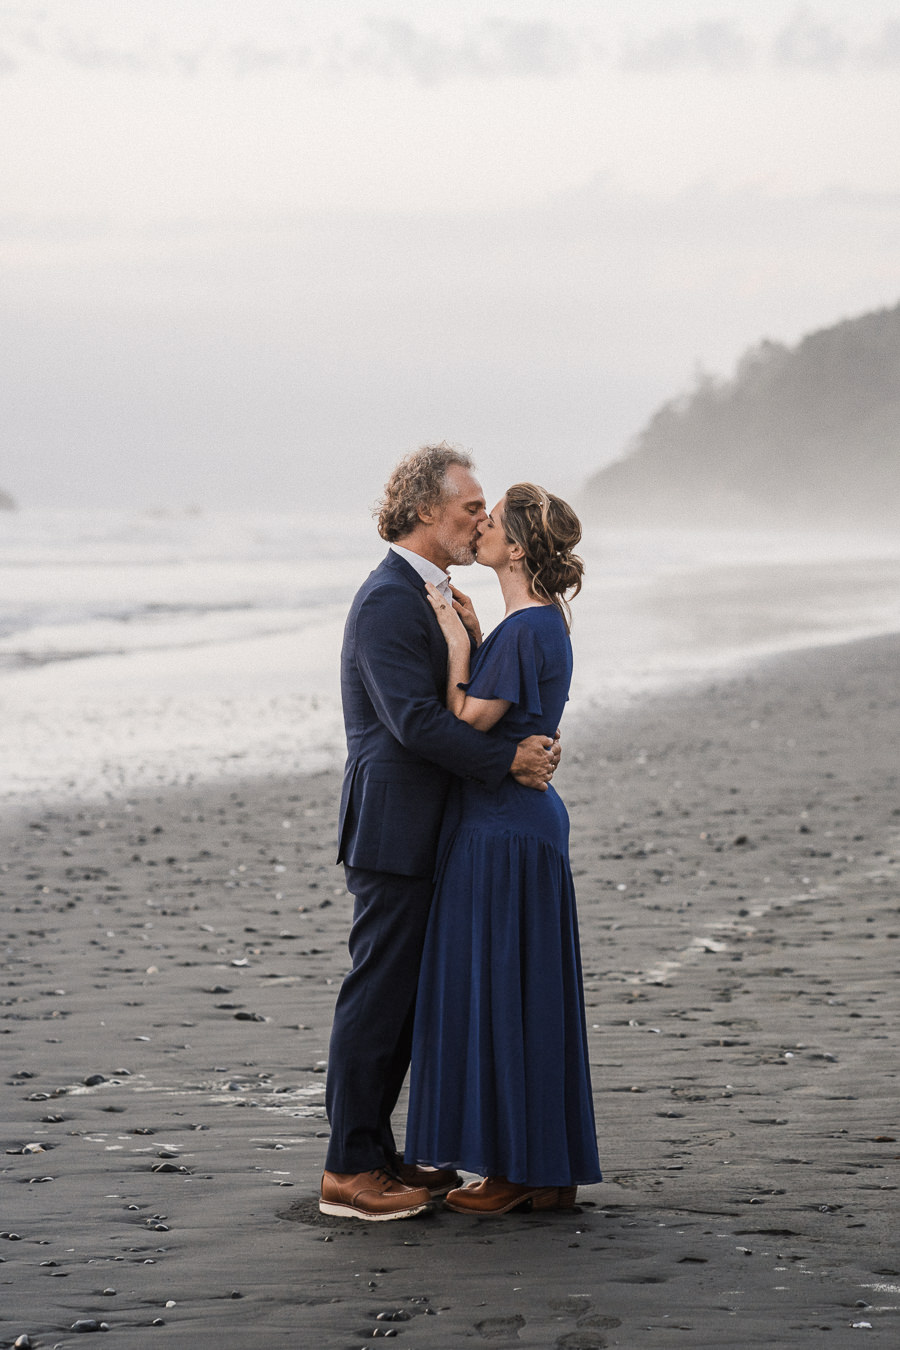 Bride and groom share a kiss on the misty beaches of Washington after their coastal elopement